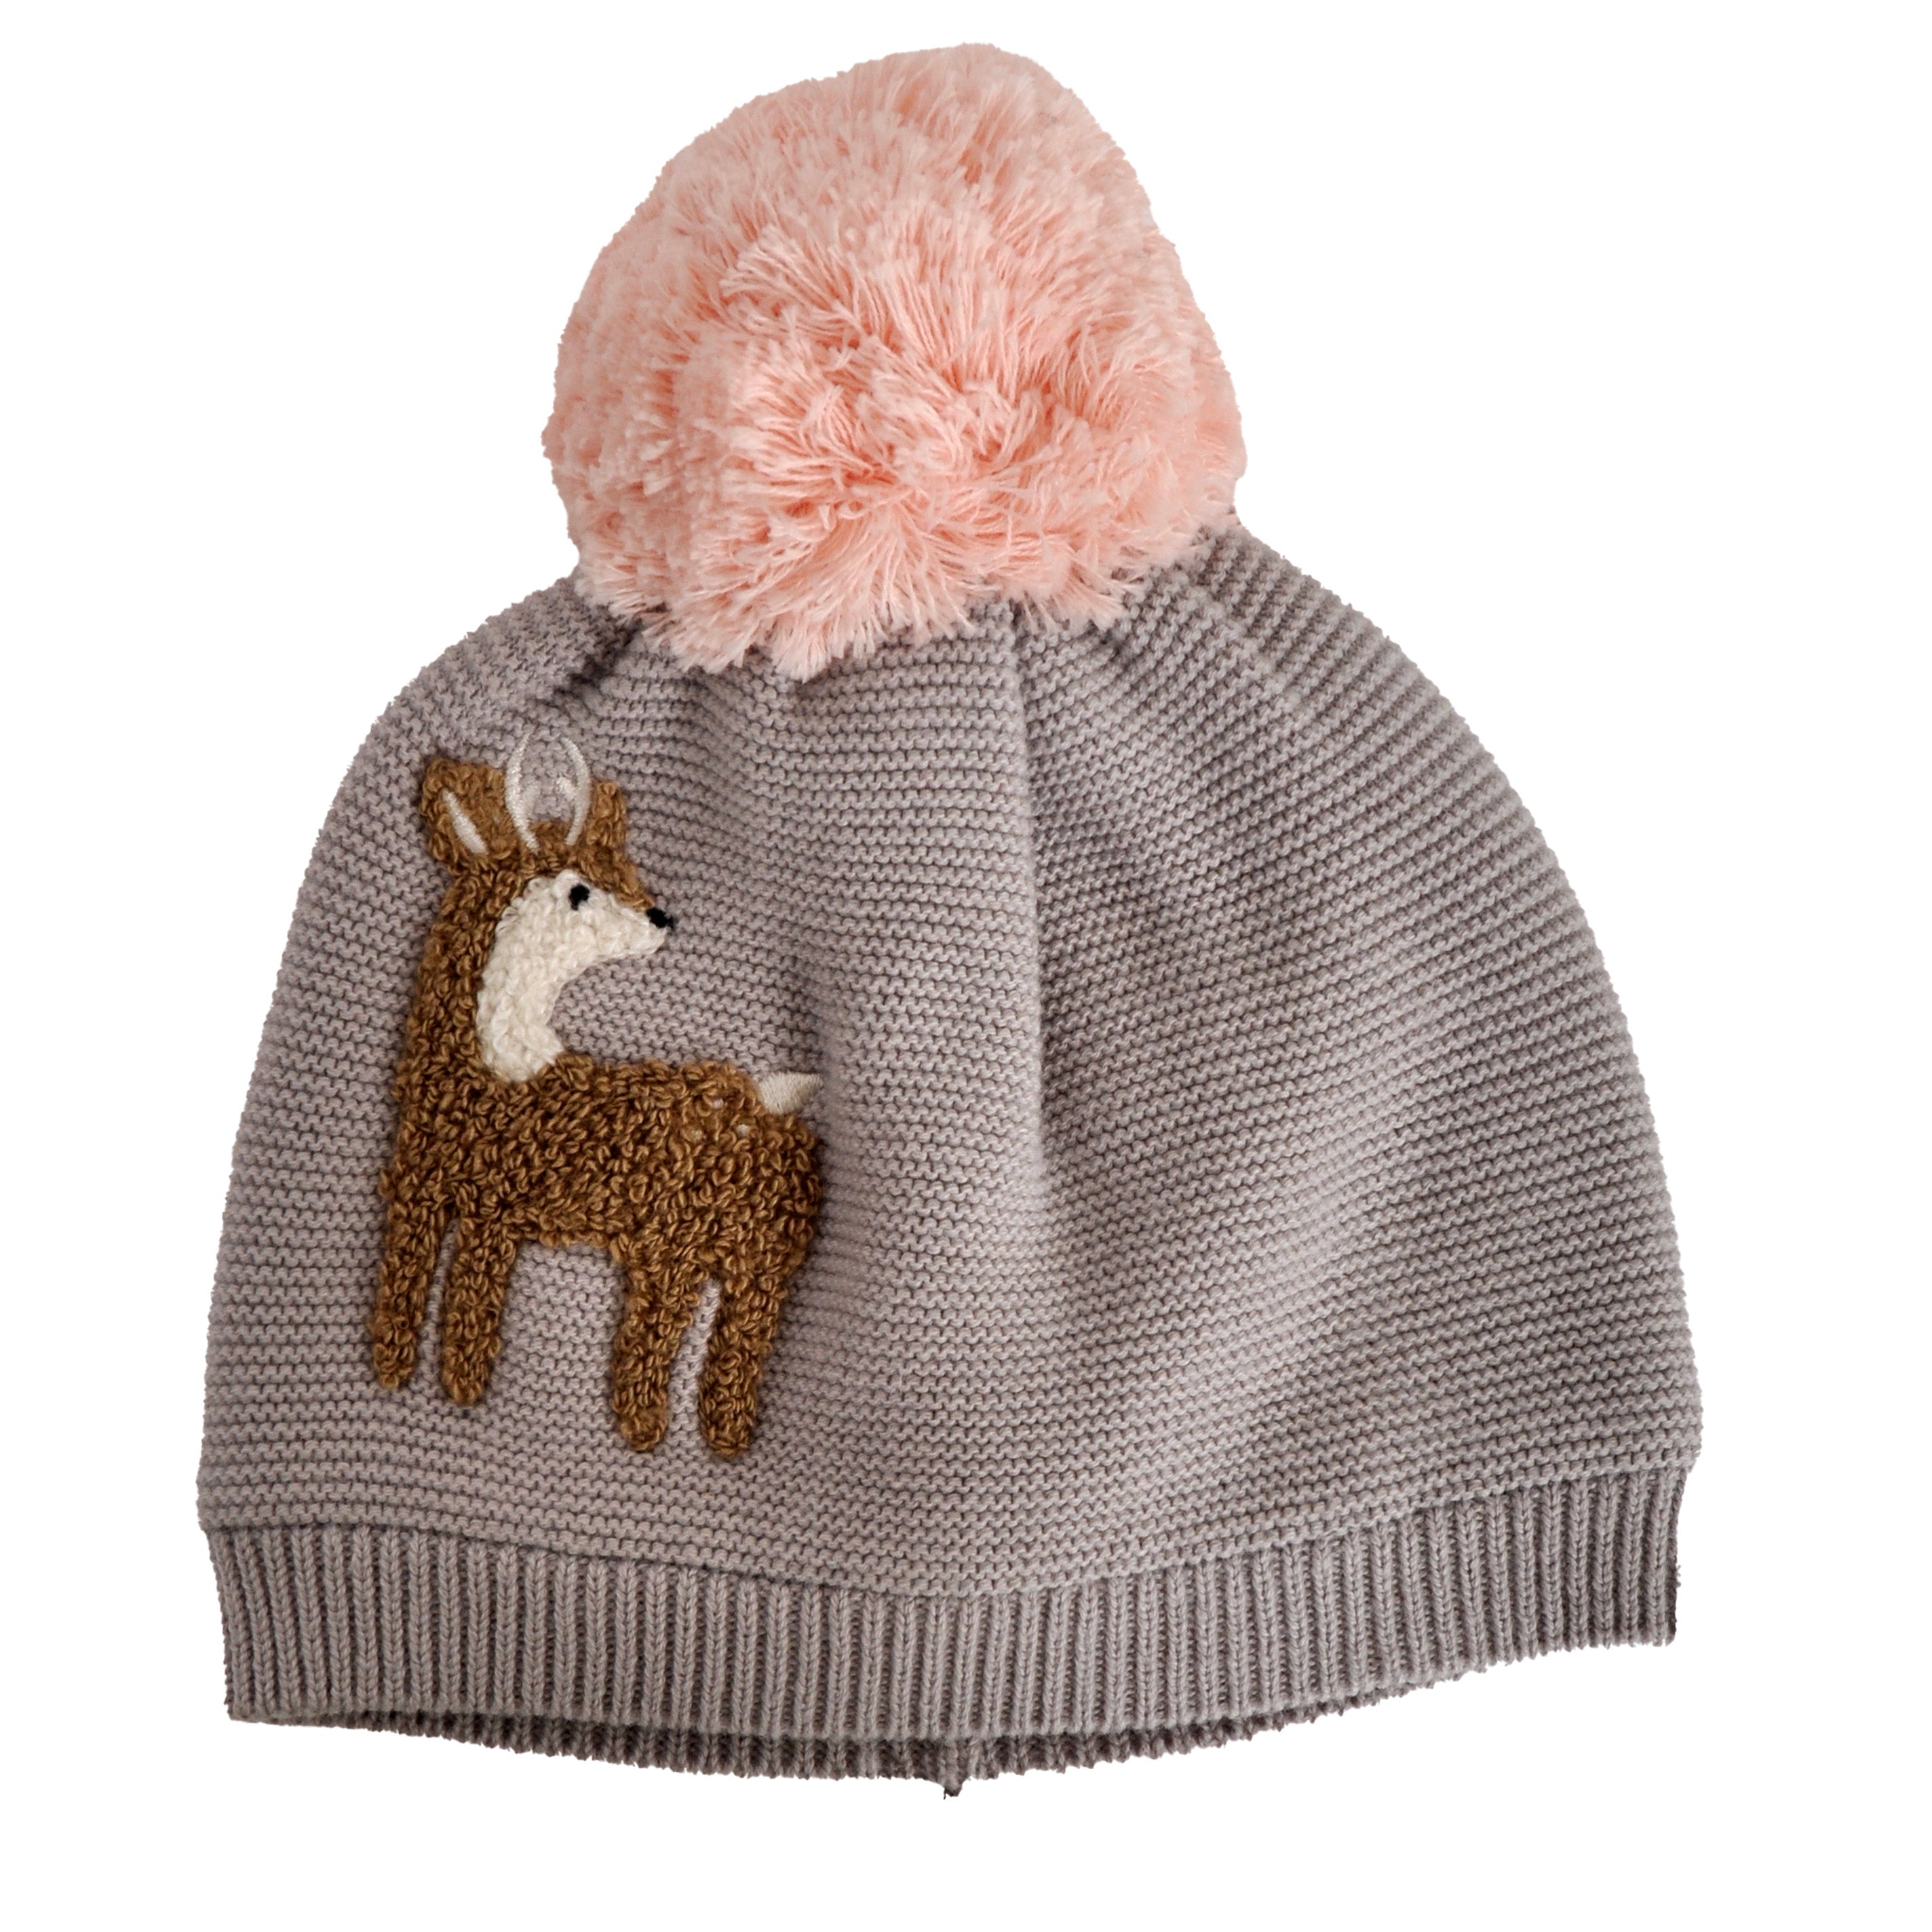 Baby Knitted Beanie 6-12 Months - Deer